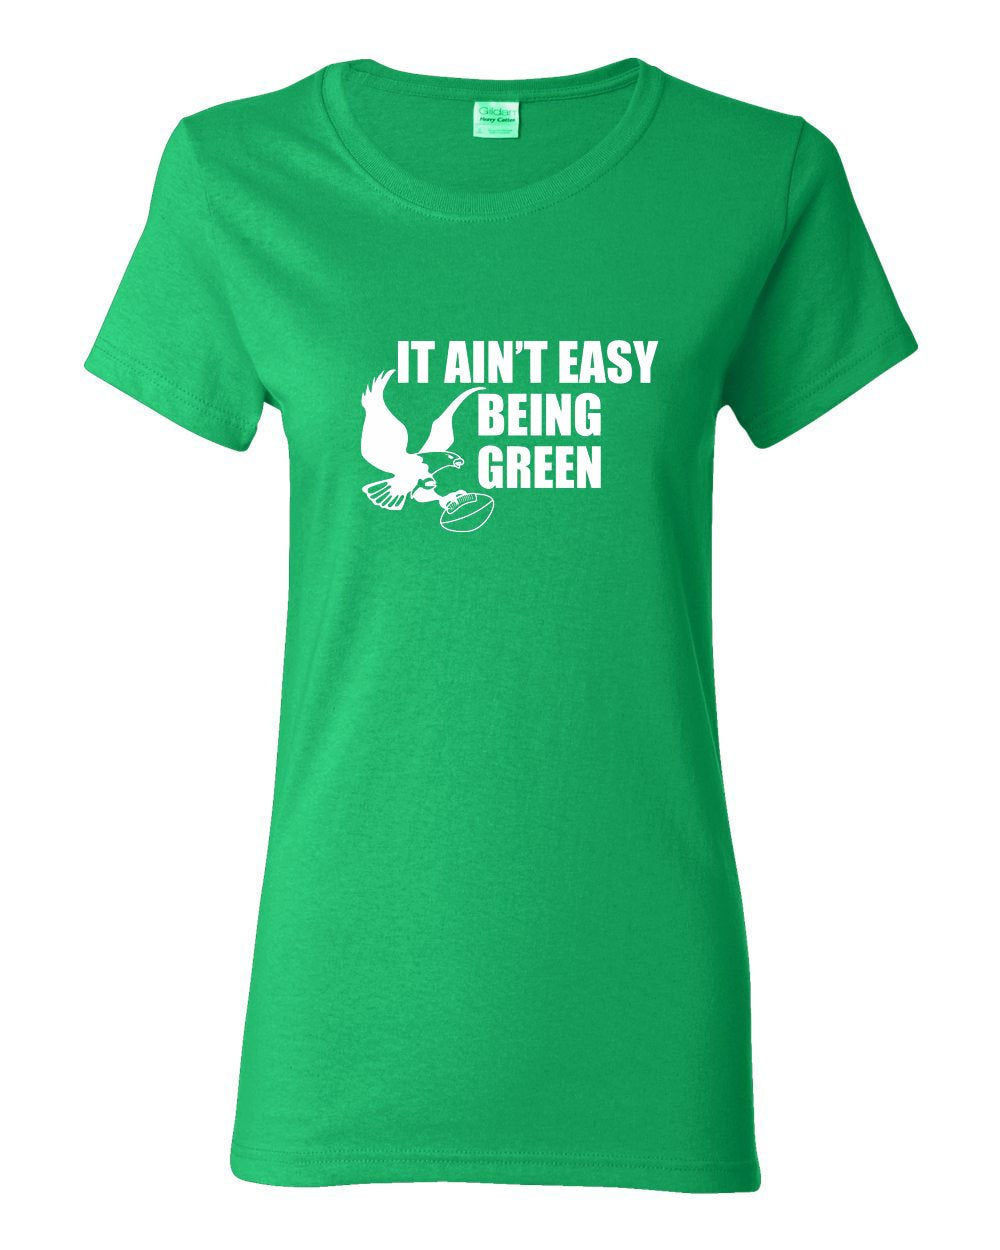 It Ain't Easy Being Green LADIES Missy-Fit T-Shirt